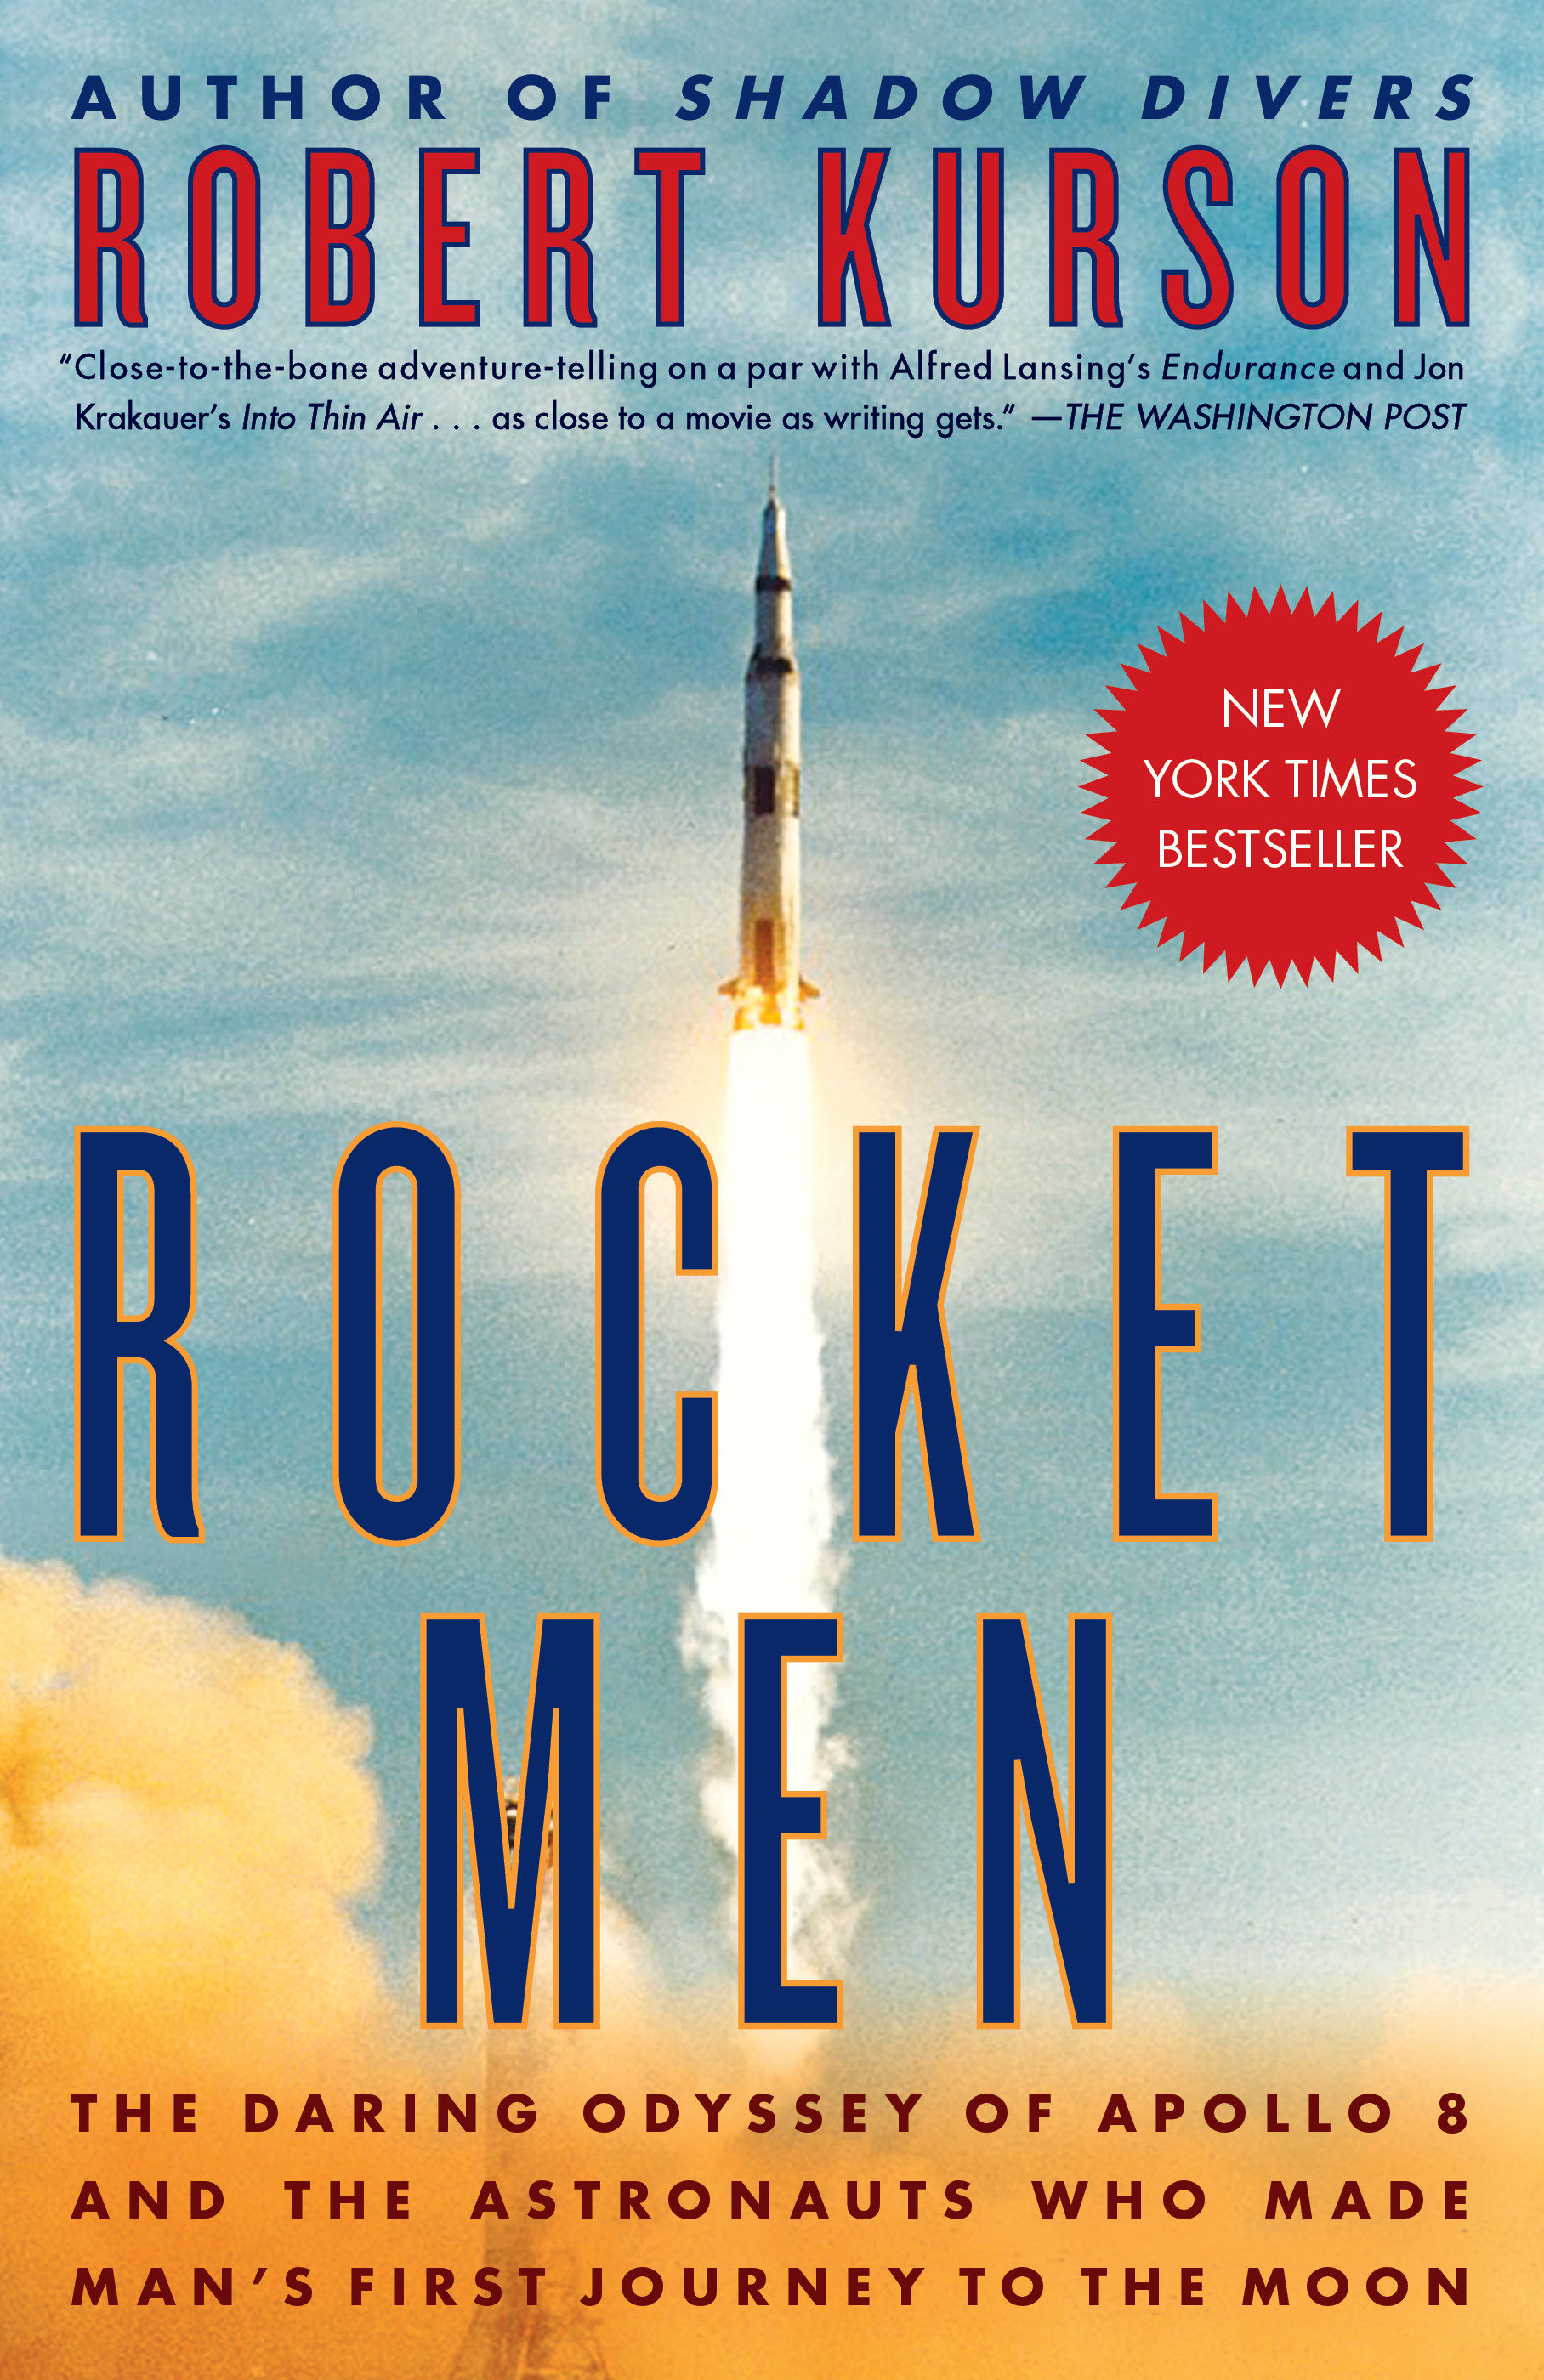 Rocket Men the daring odyssey of Apollo 8 and the astronauts who made man's first journey to the Moon cover image